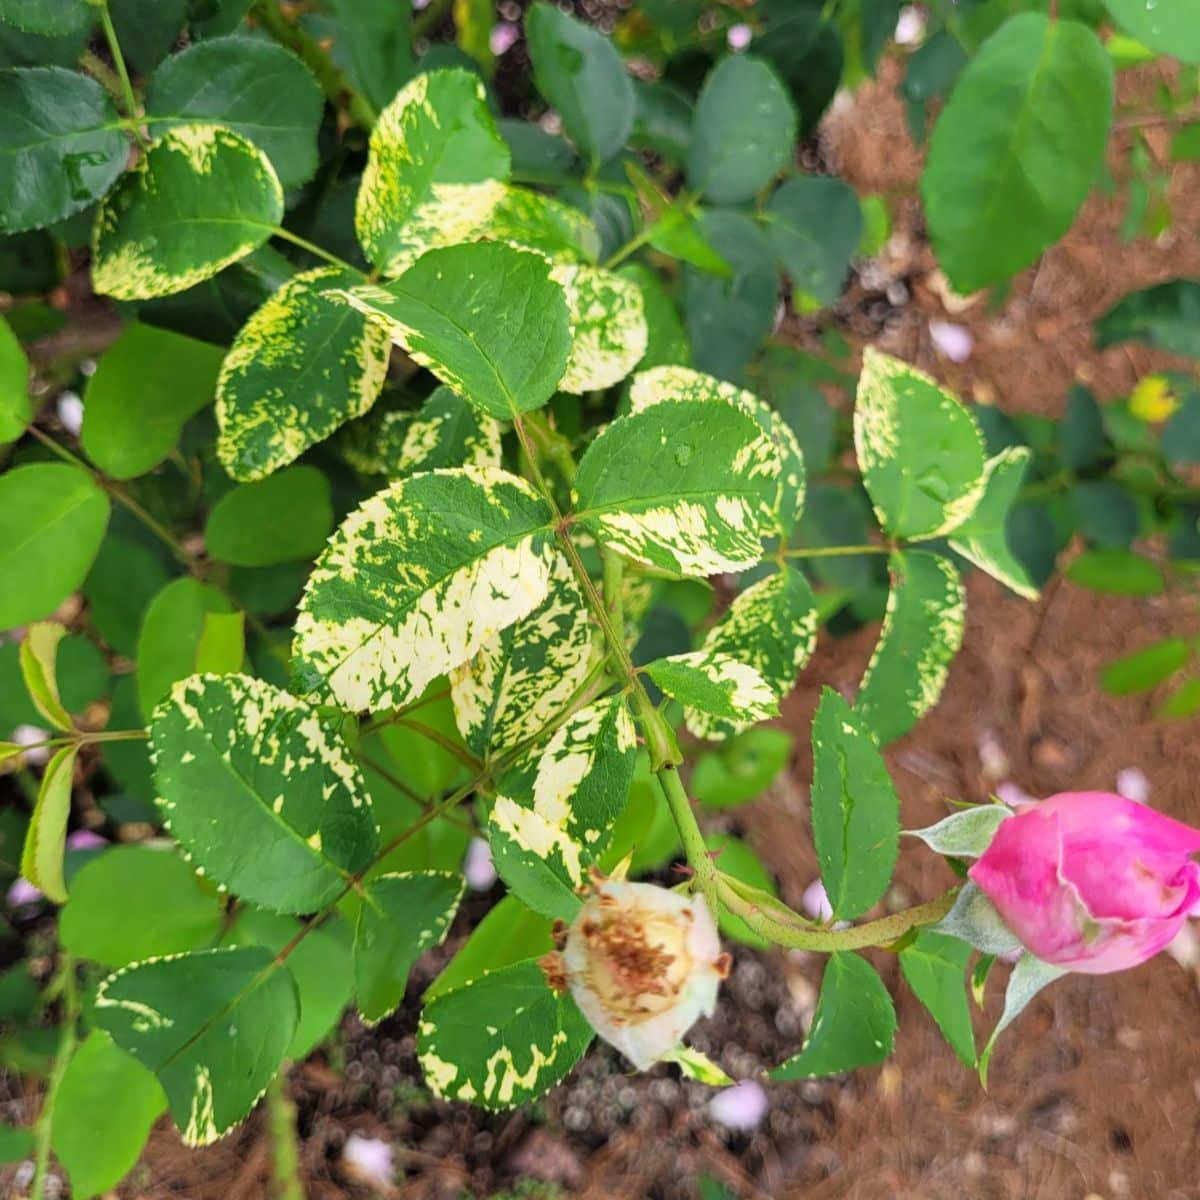 A rose infected with rose mosaic virus.